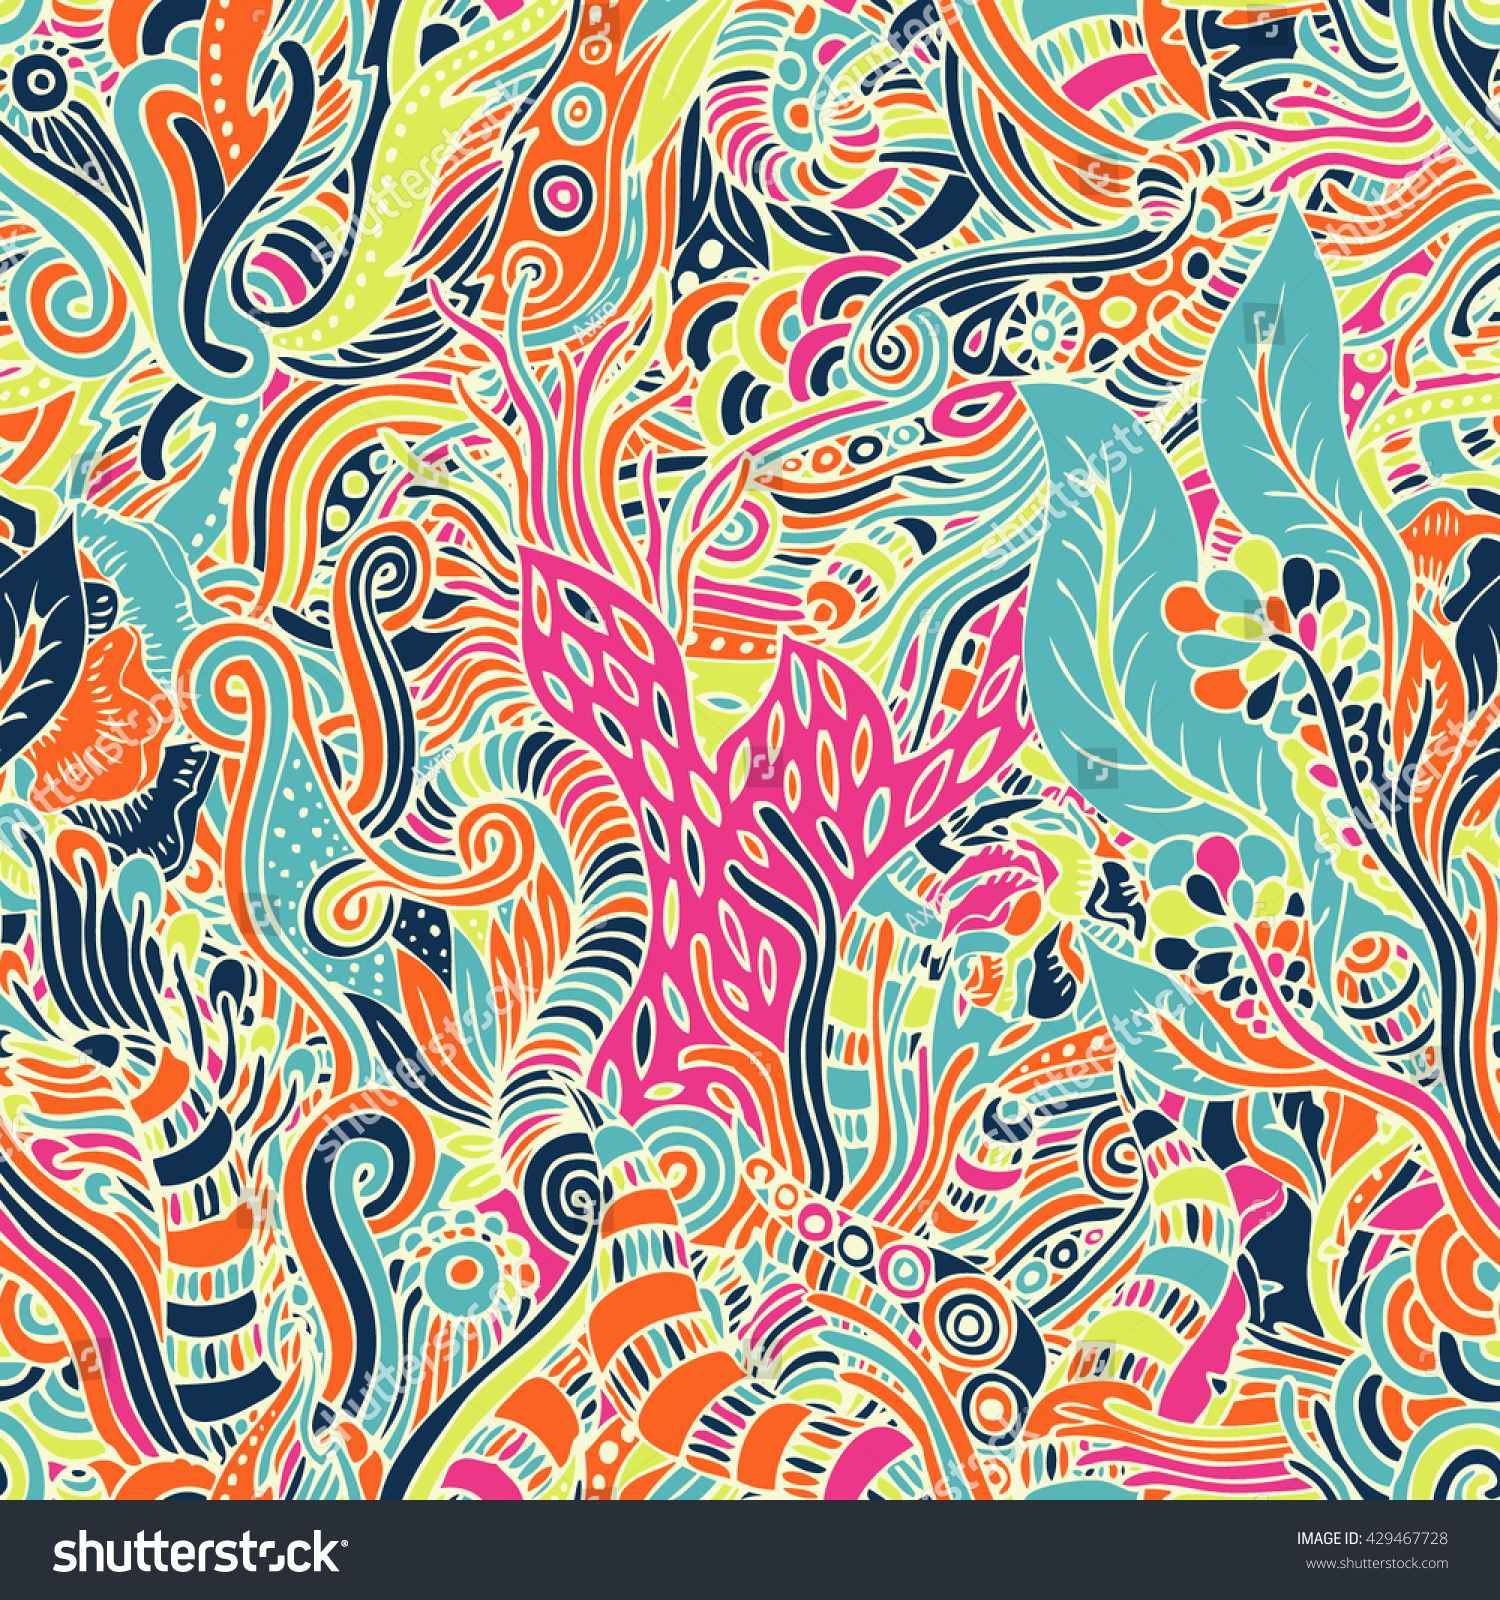 Seamless Vector Psychedelic Pattern Stock Vector 429467728 - Shutterstock